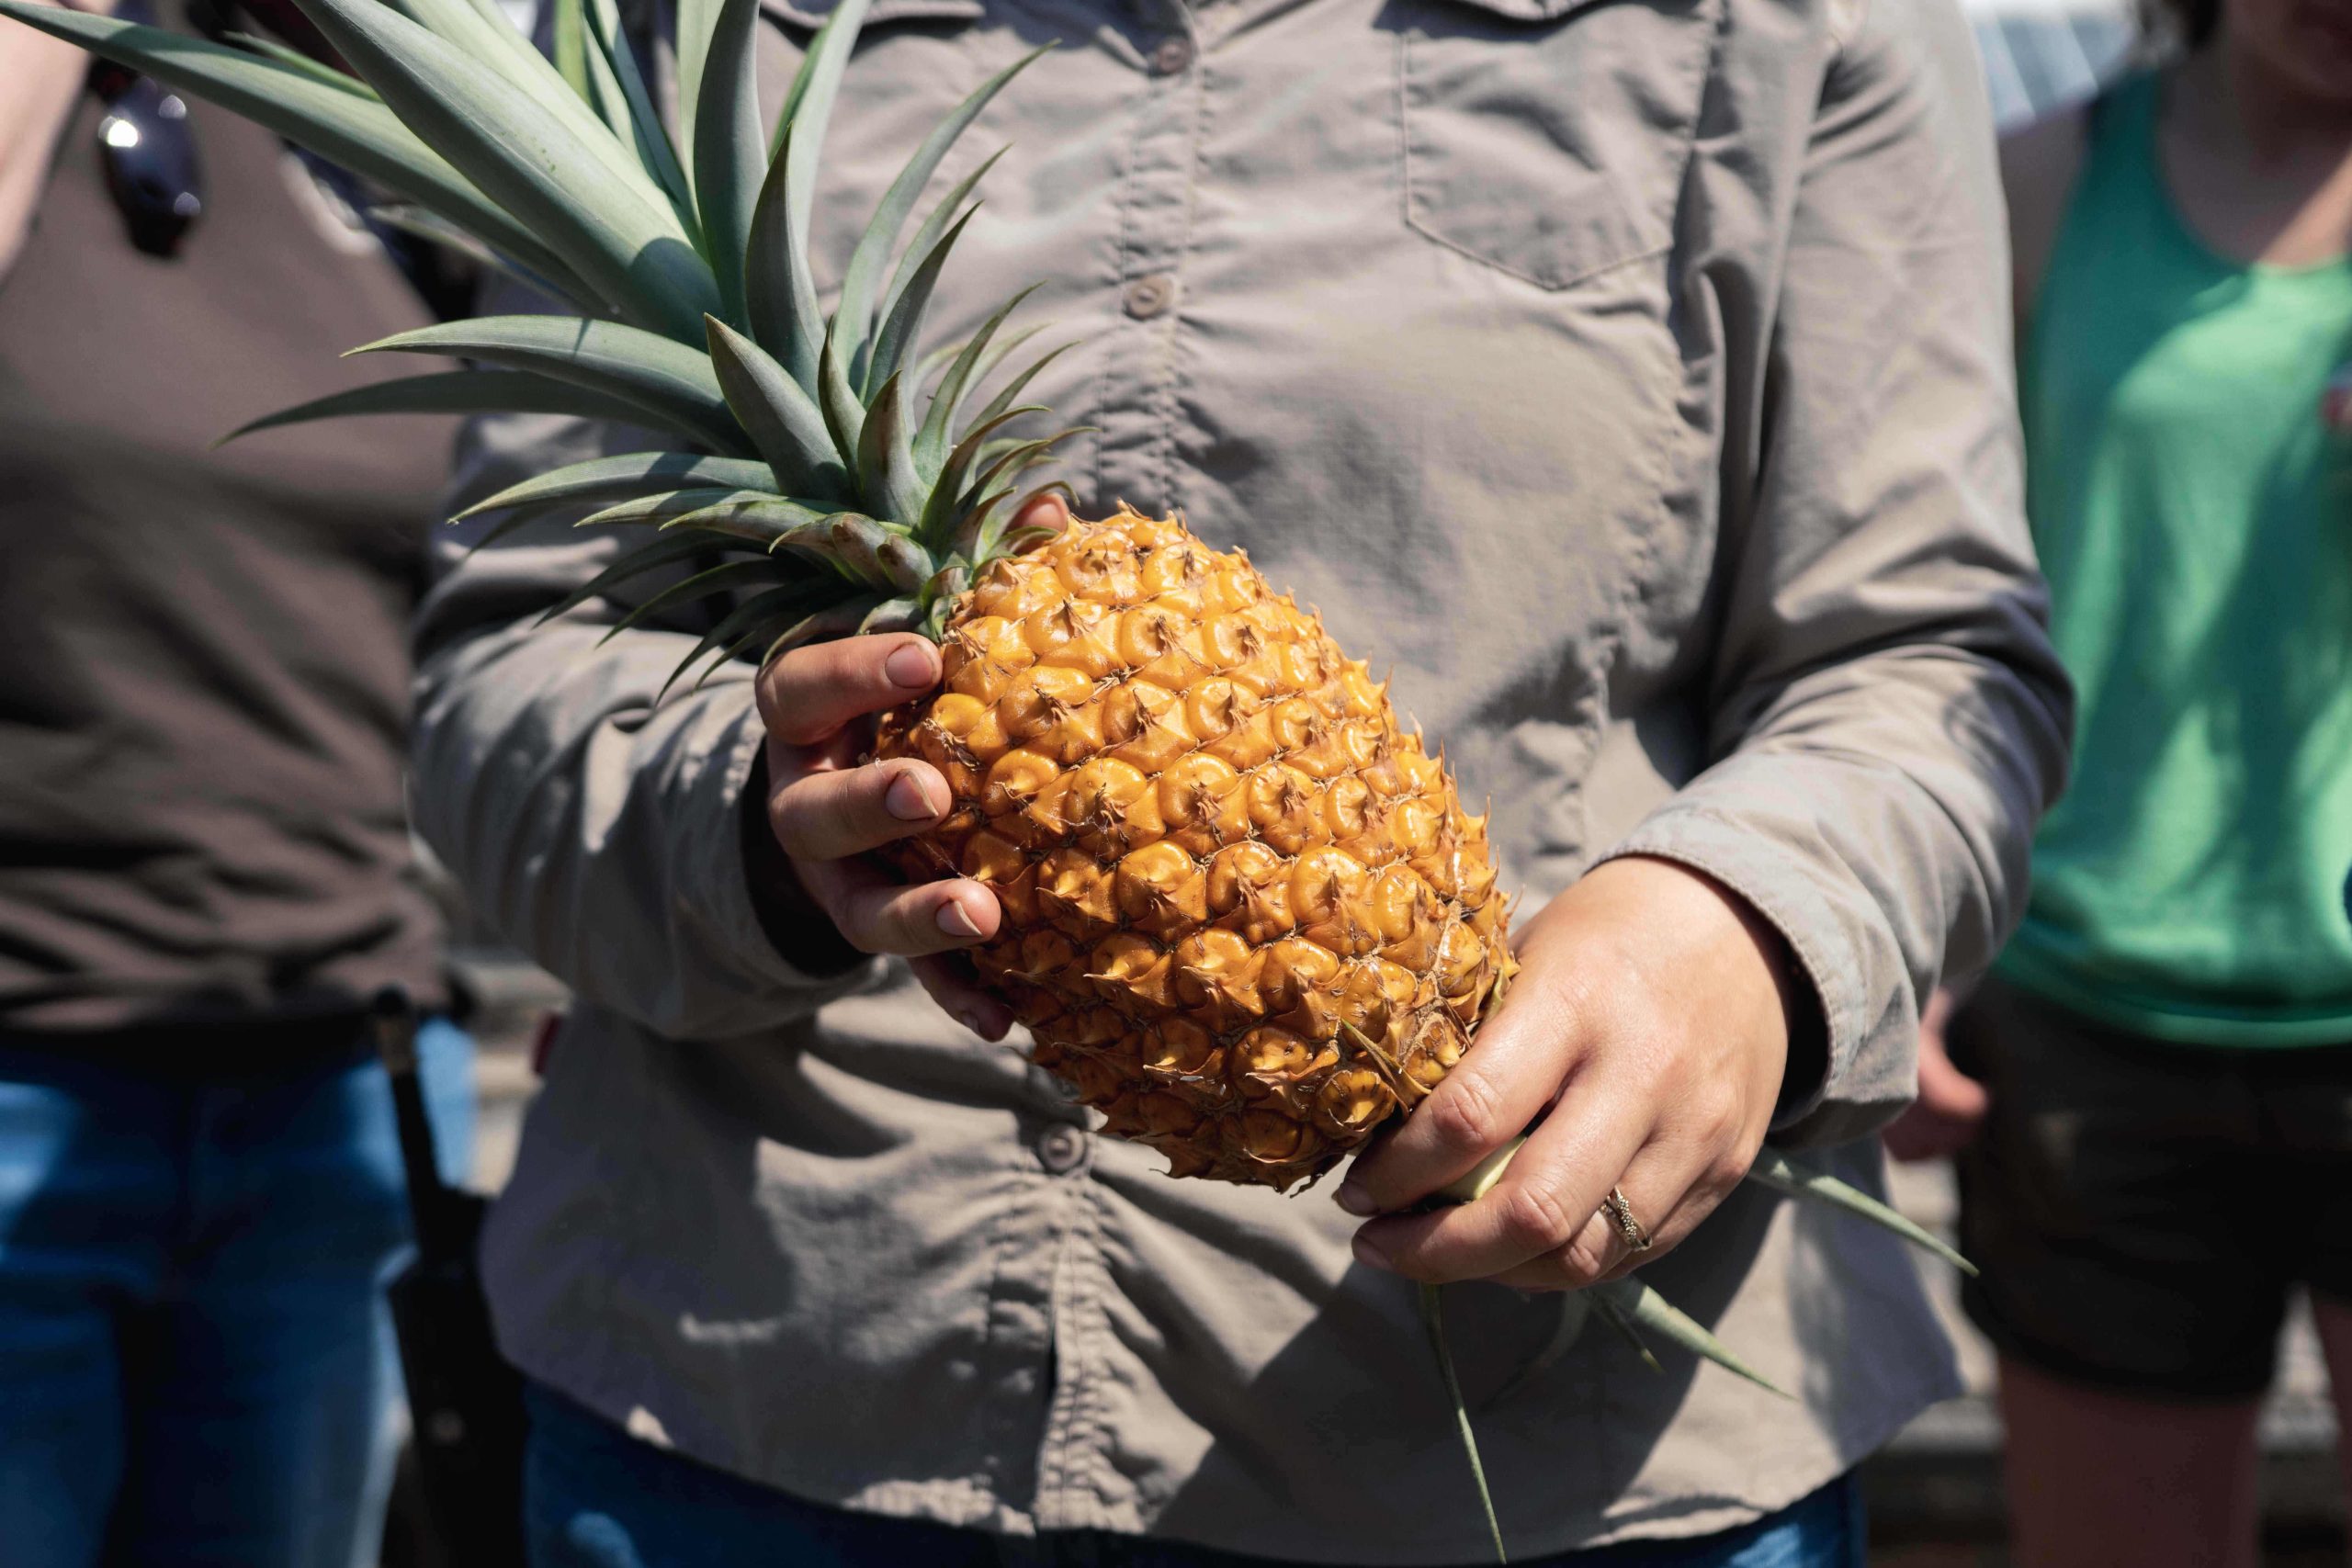 THE world’s priciest pineapple - costing £1,000 per slice - is grown in CORNWALL